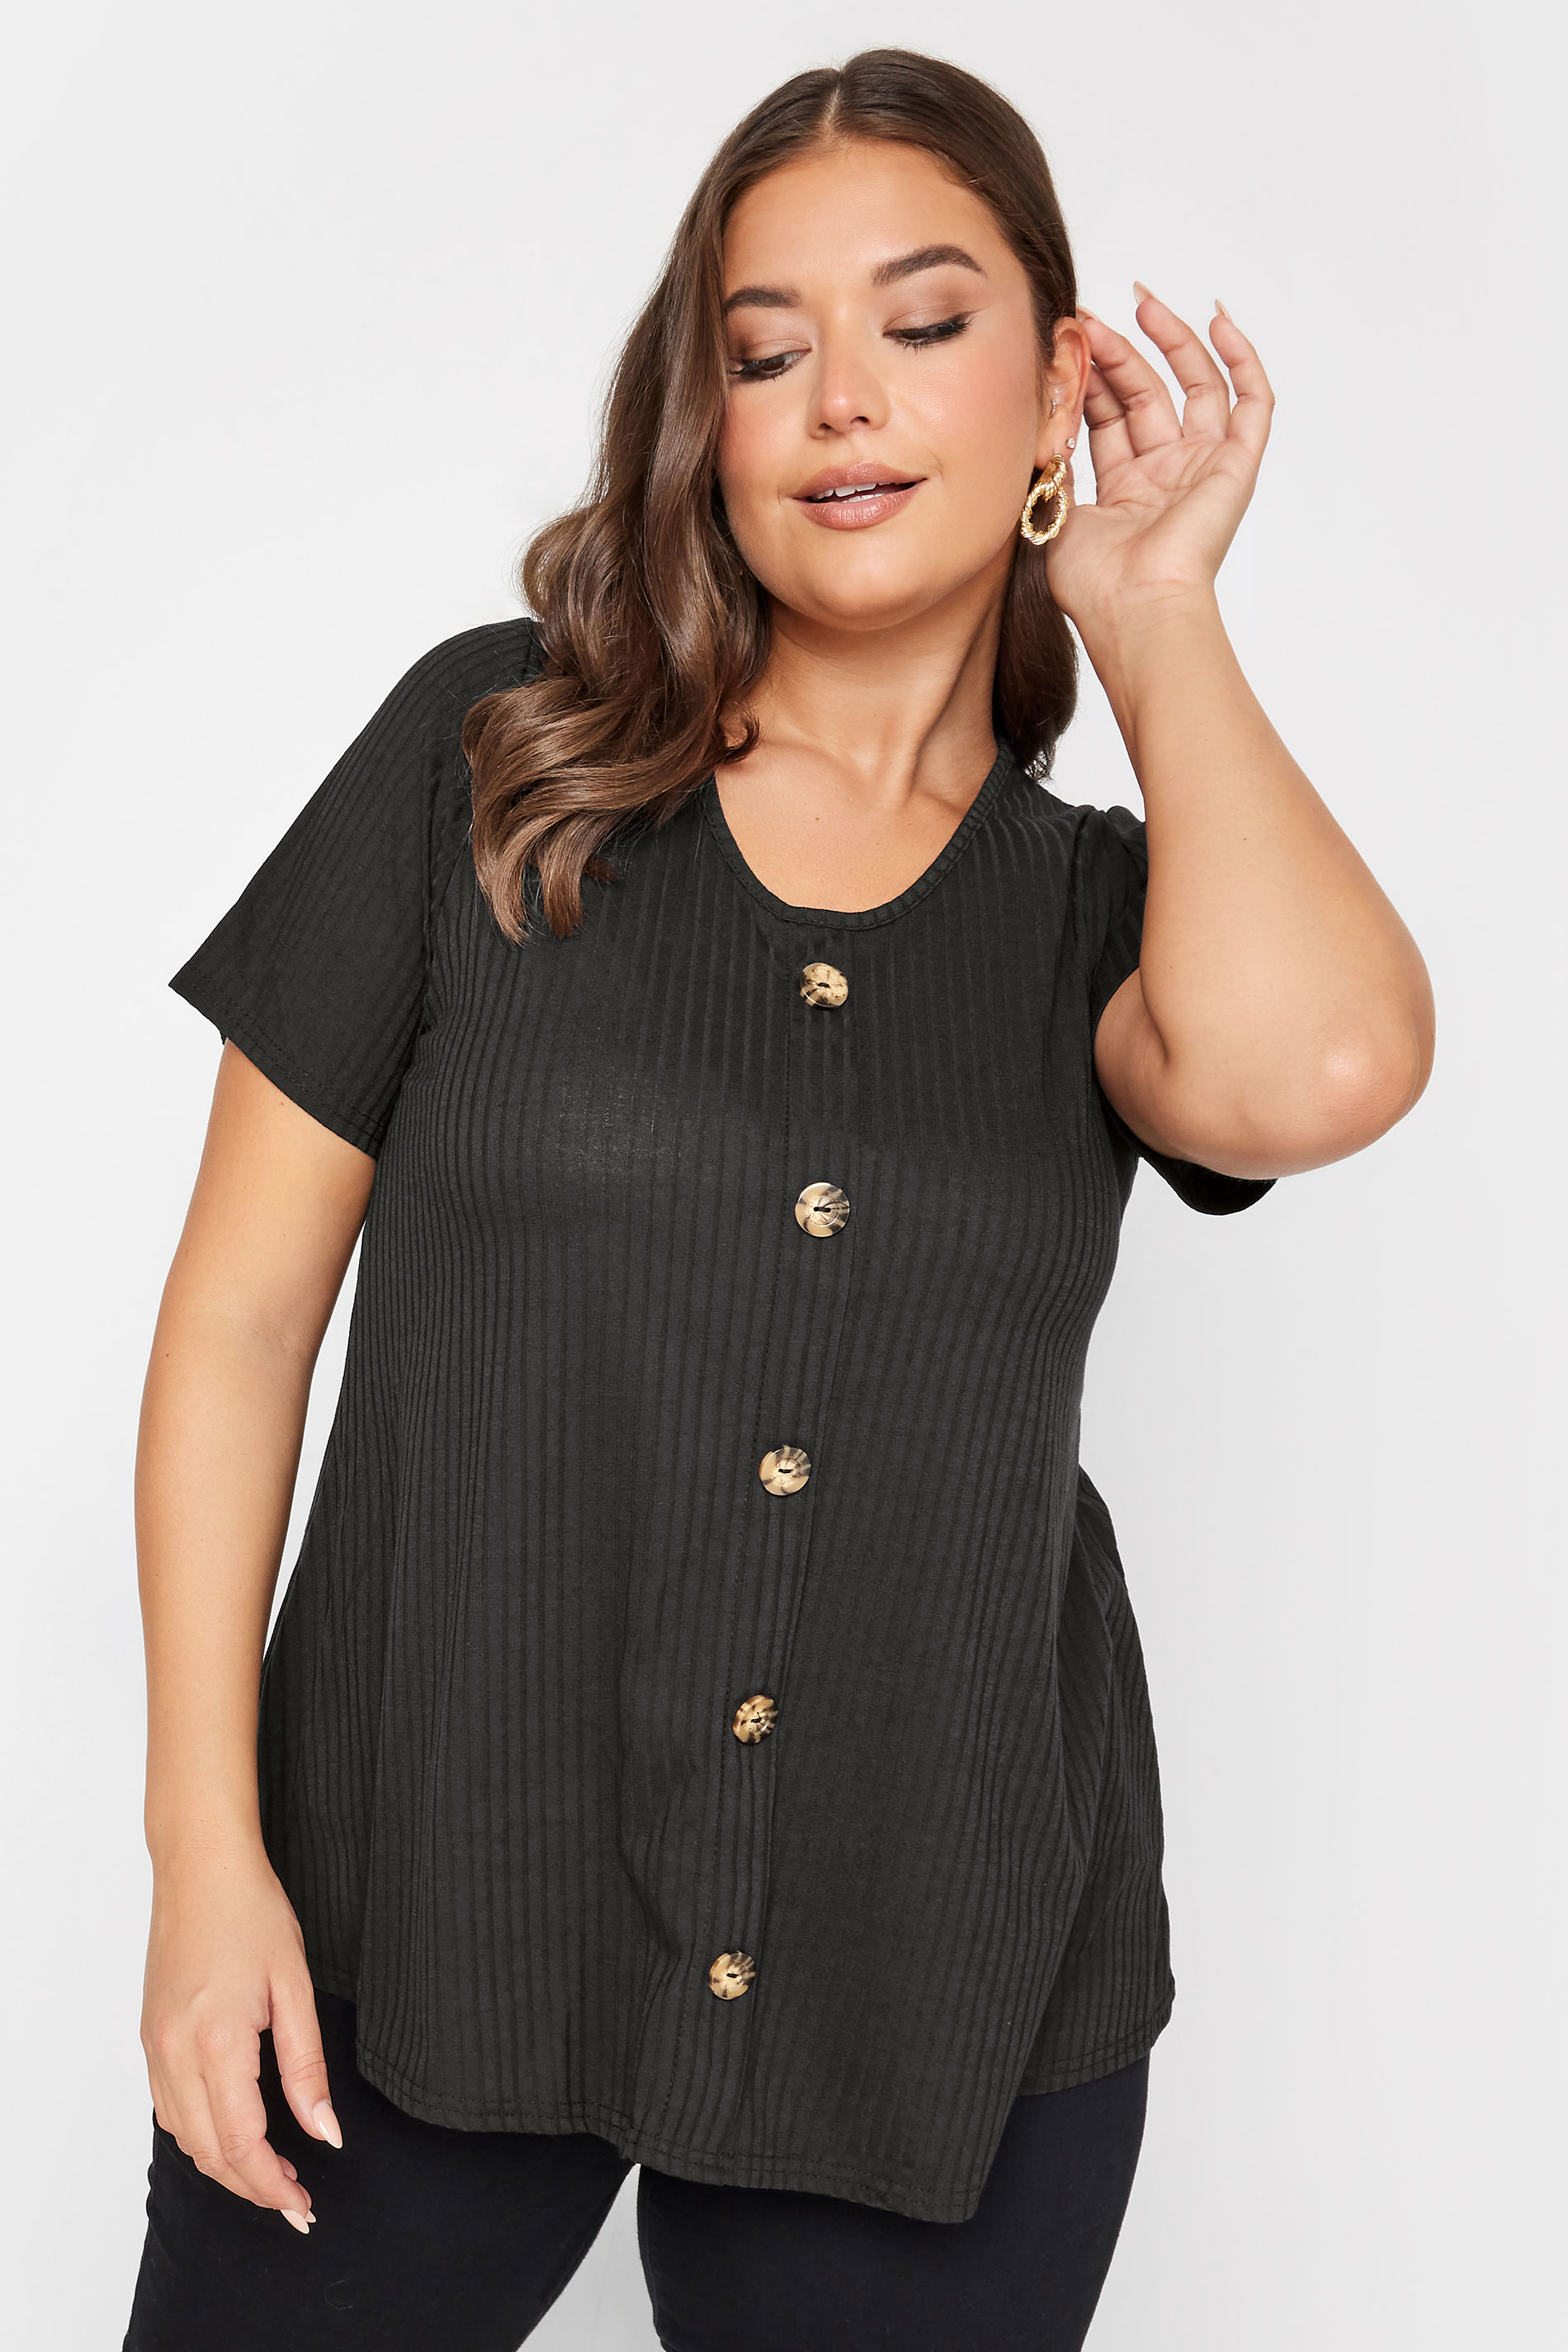 LIMITED COLLECTION Curve Plus Size 2 PACK Khaki Green & Black Ribbed Swing Tops | Yours Clothing  3